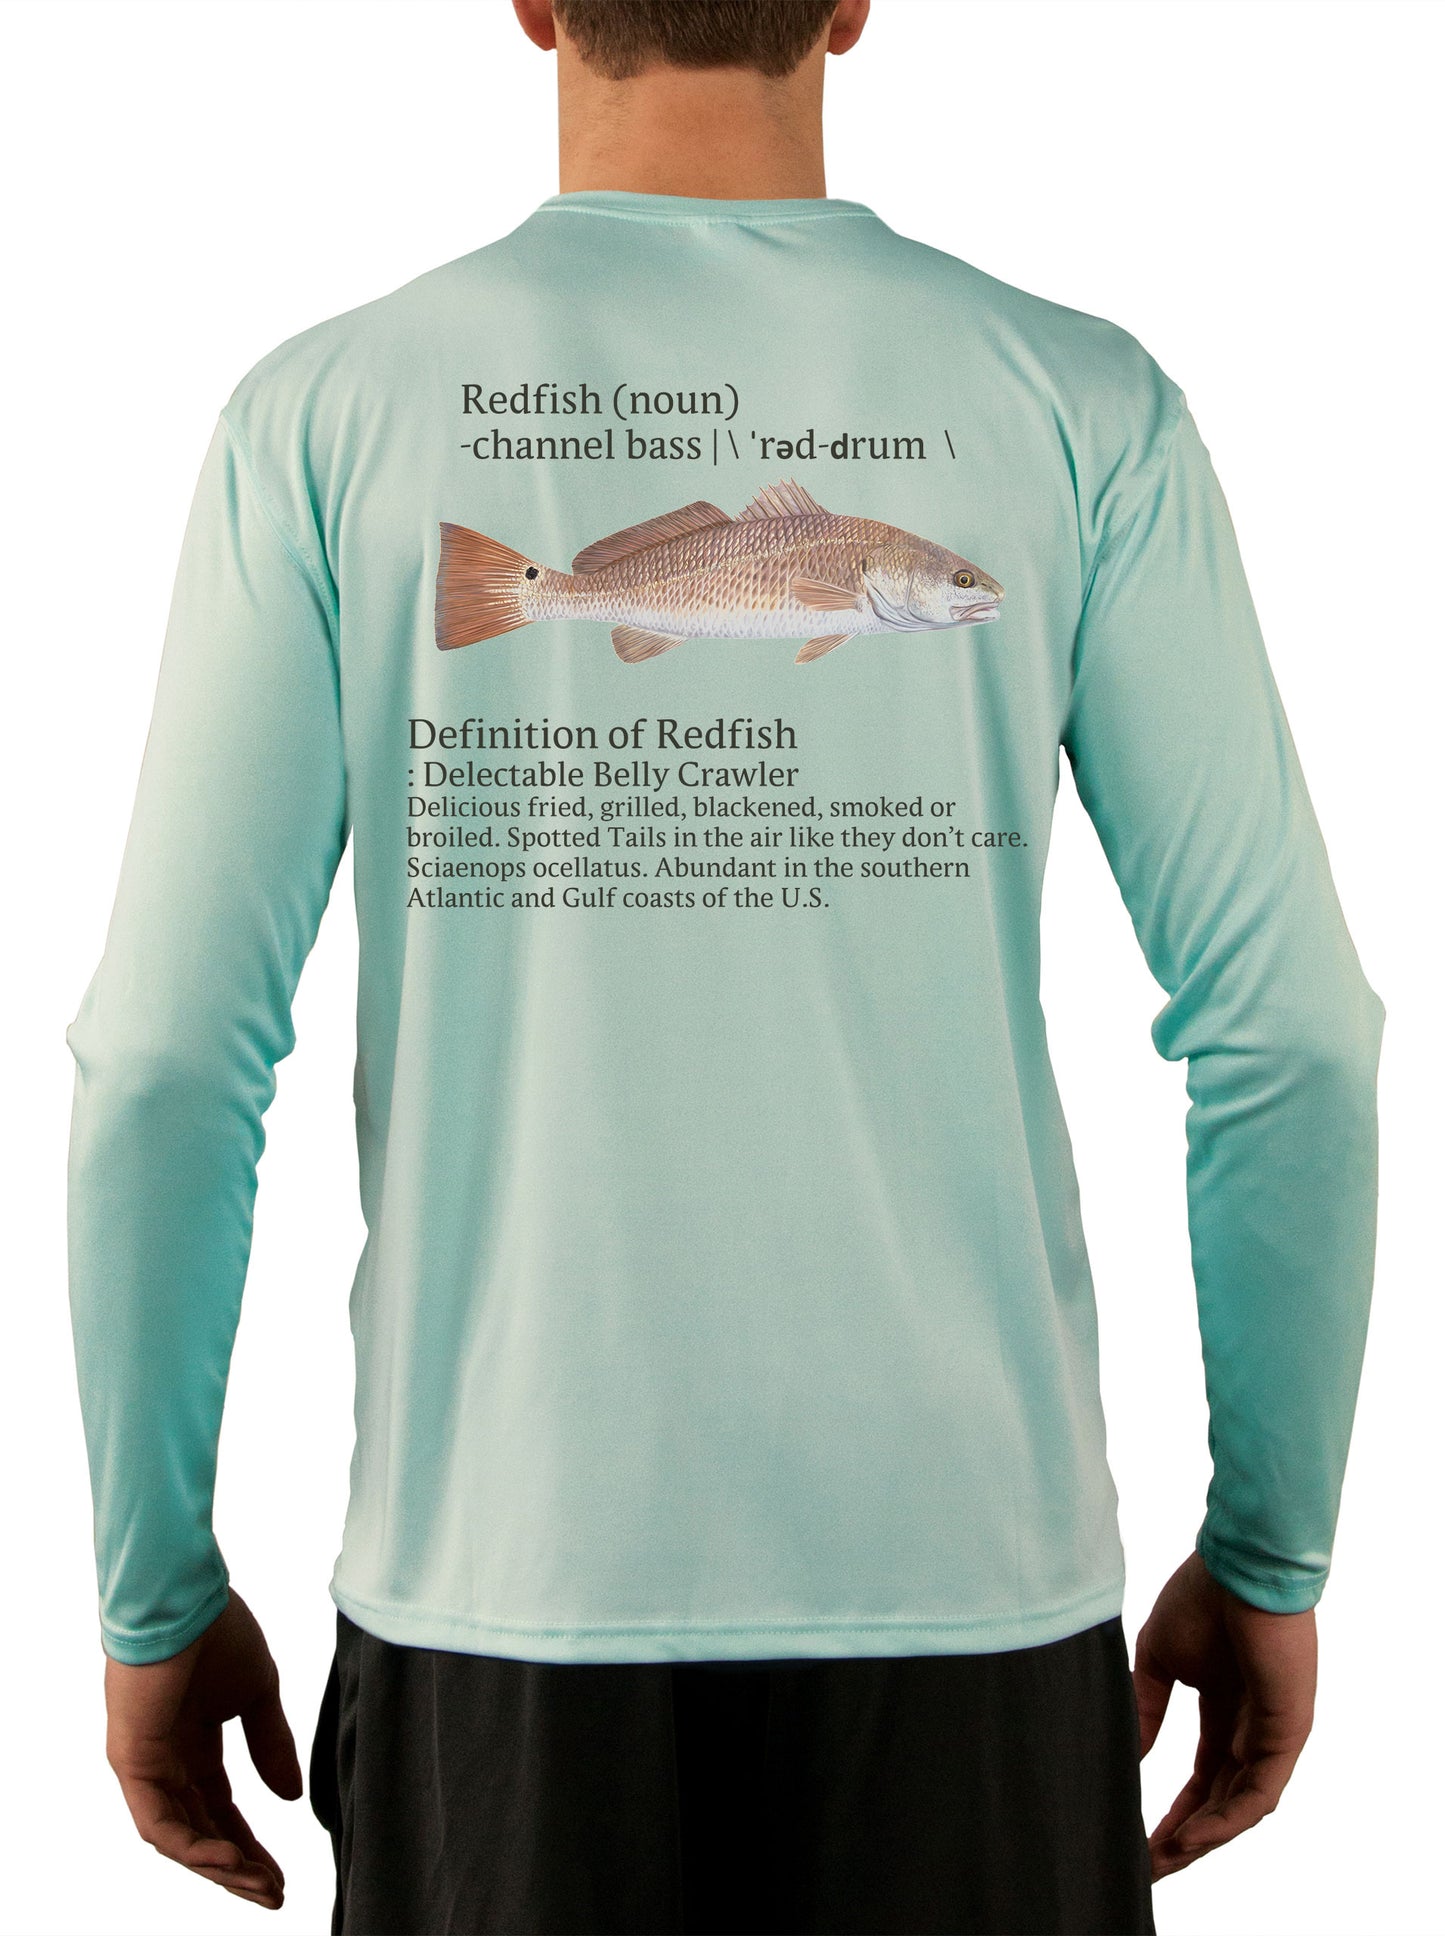 Redfish Fishing Shirts for Men Red Drum Channel Bass - UV Protected +50 Sun  Protection with Moisture Wicking Technology